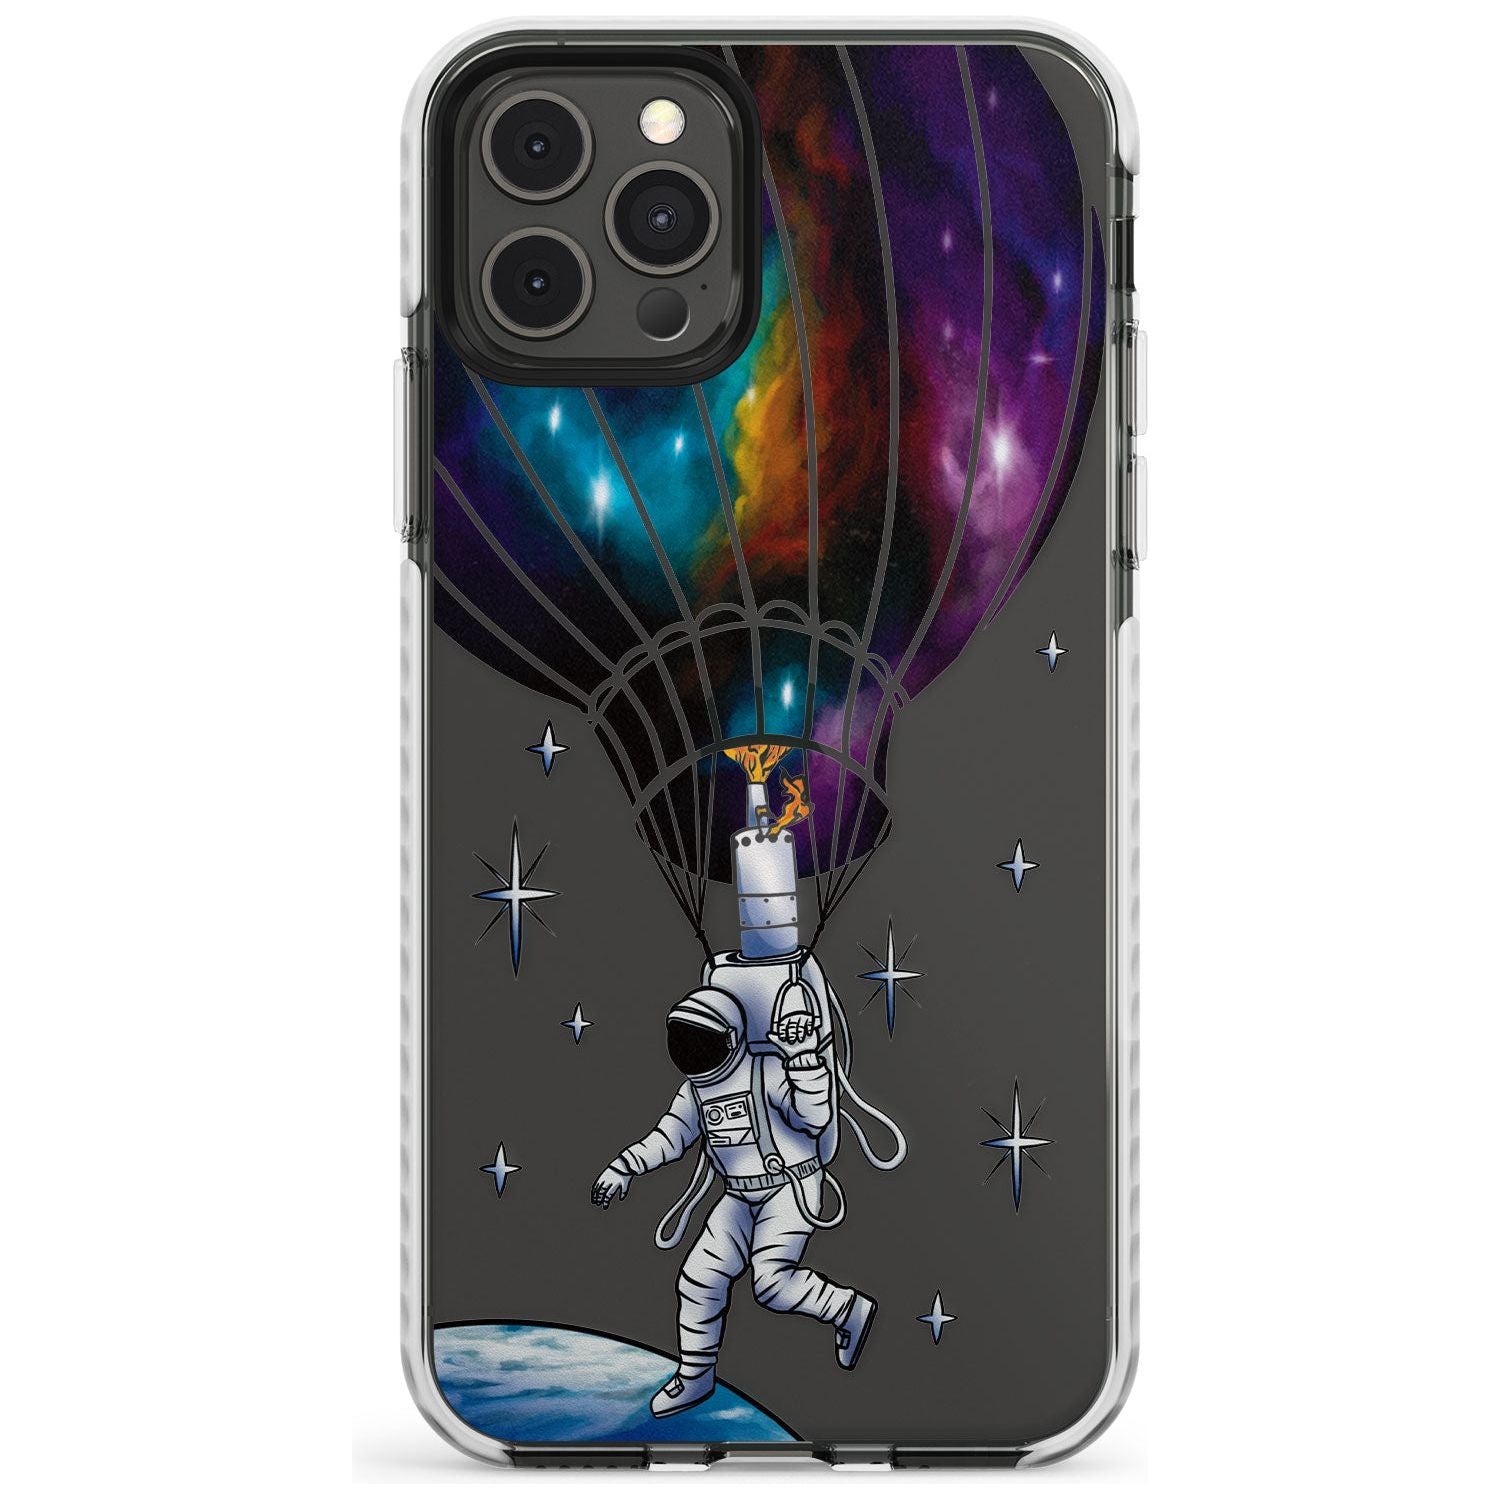 SOLO ODYSSEY Slim TPU Phone Case for iPhone 11 Pro Max